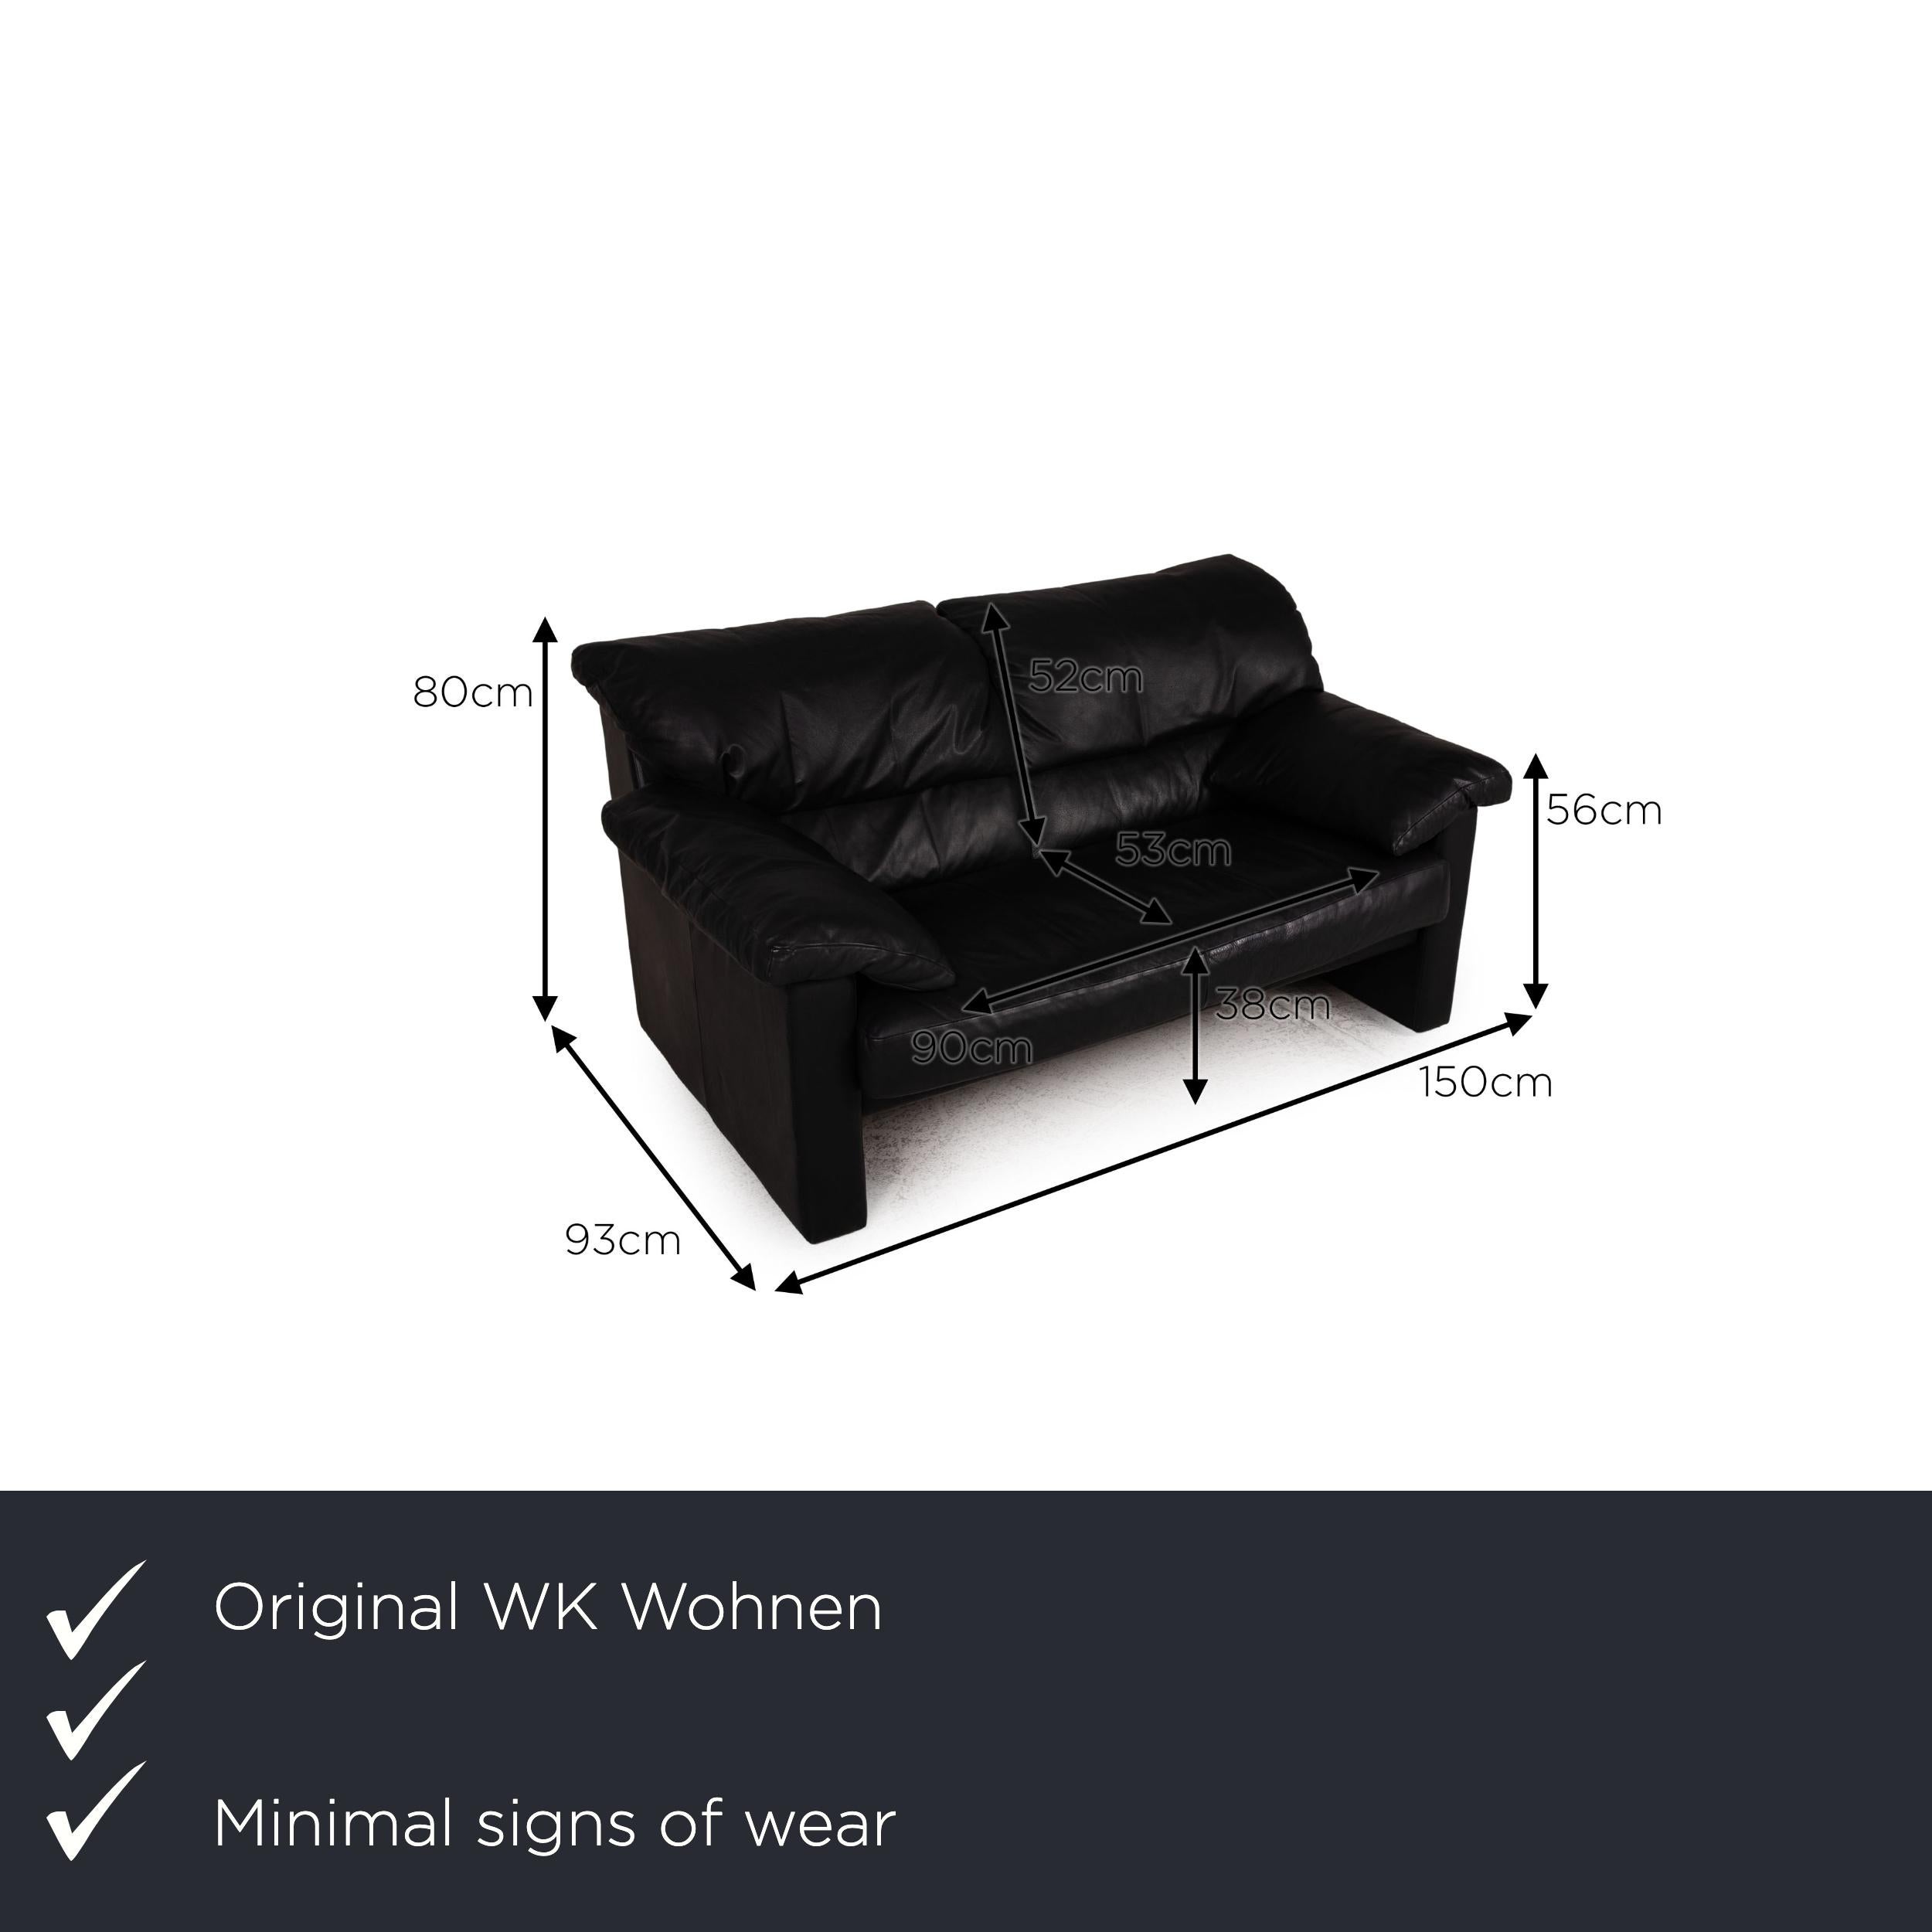 We present to you a WK Wohnen leather sofa black two-seater couch.

Product measurements in centimeters:

depth: 93
width: 150
height: 80
seat height: 38
rest height: 56
seat depth: 53
seat width: 90
back height: 52.


 